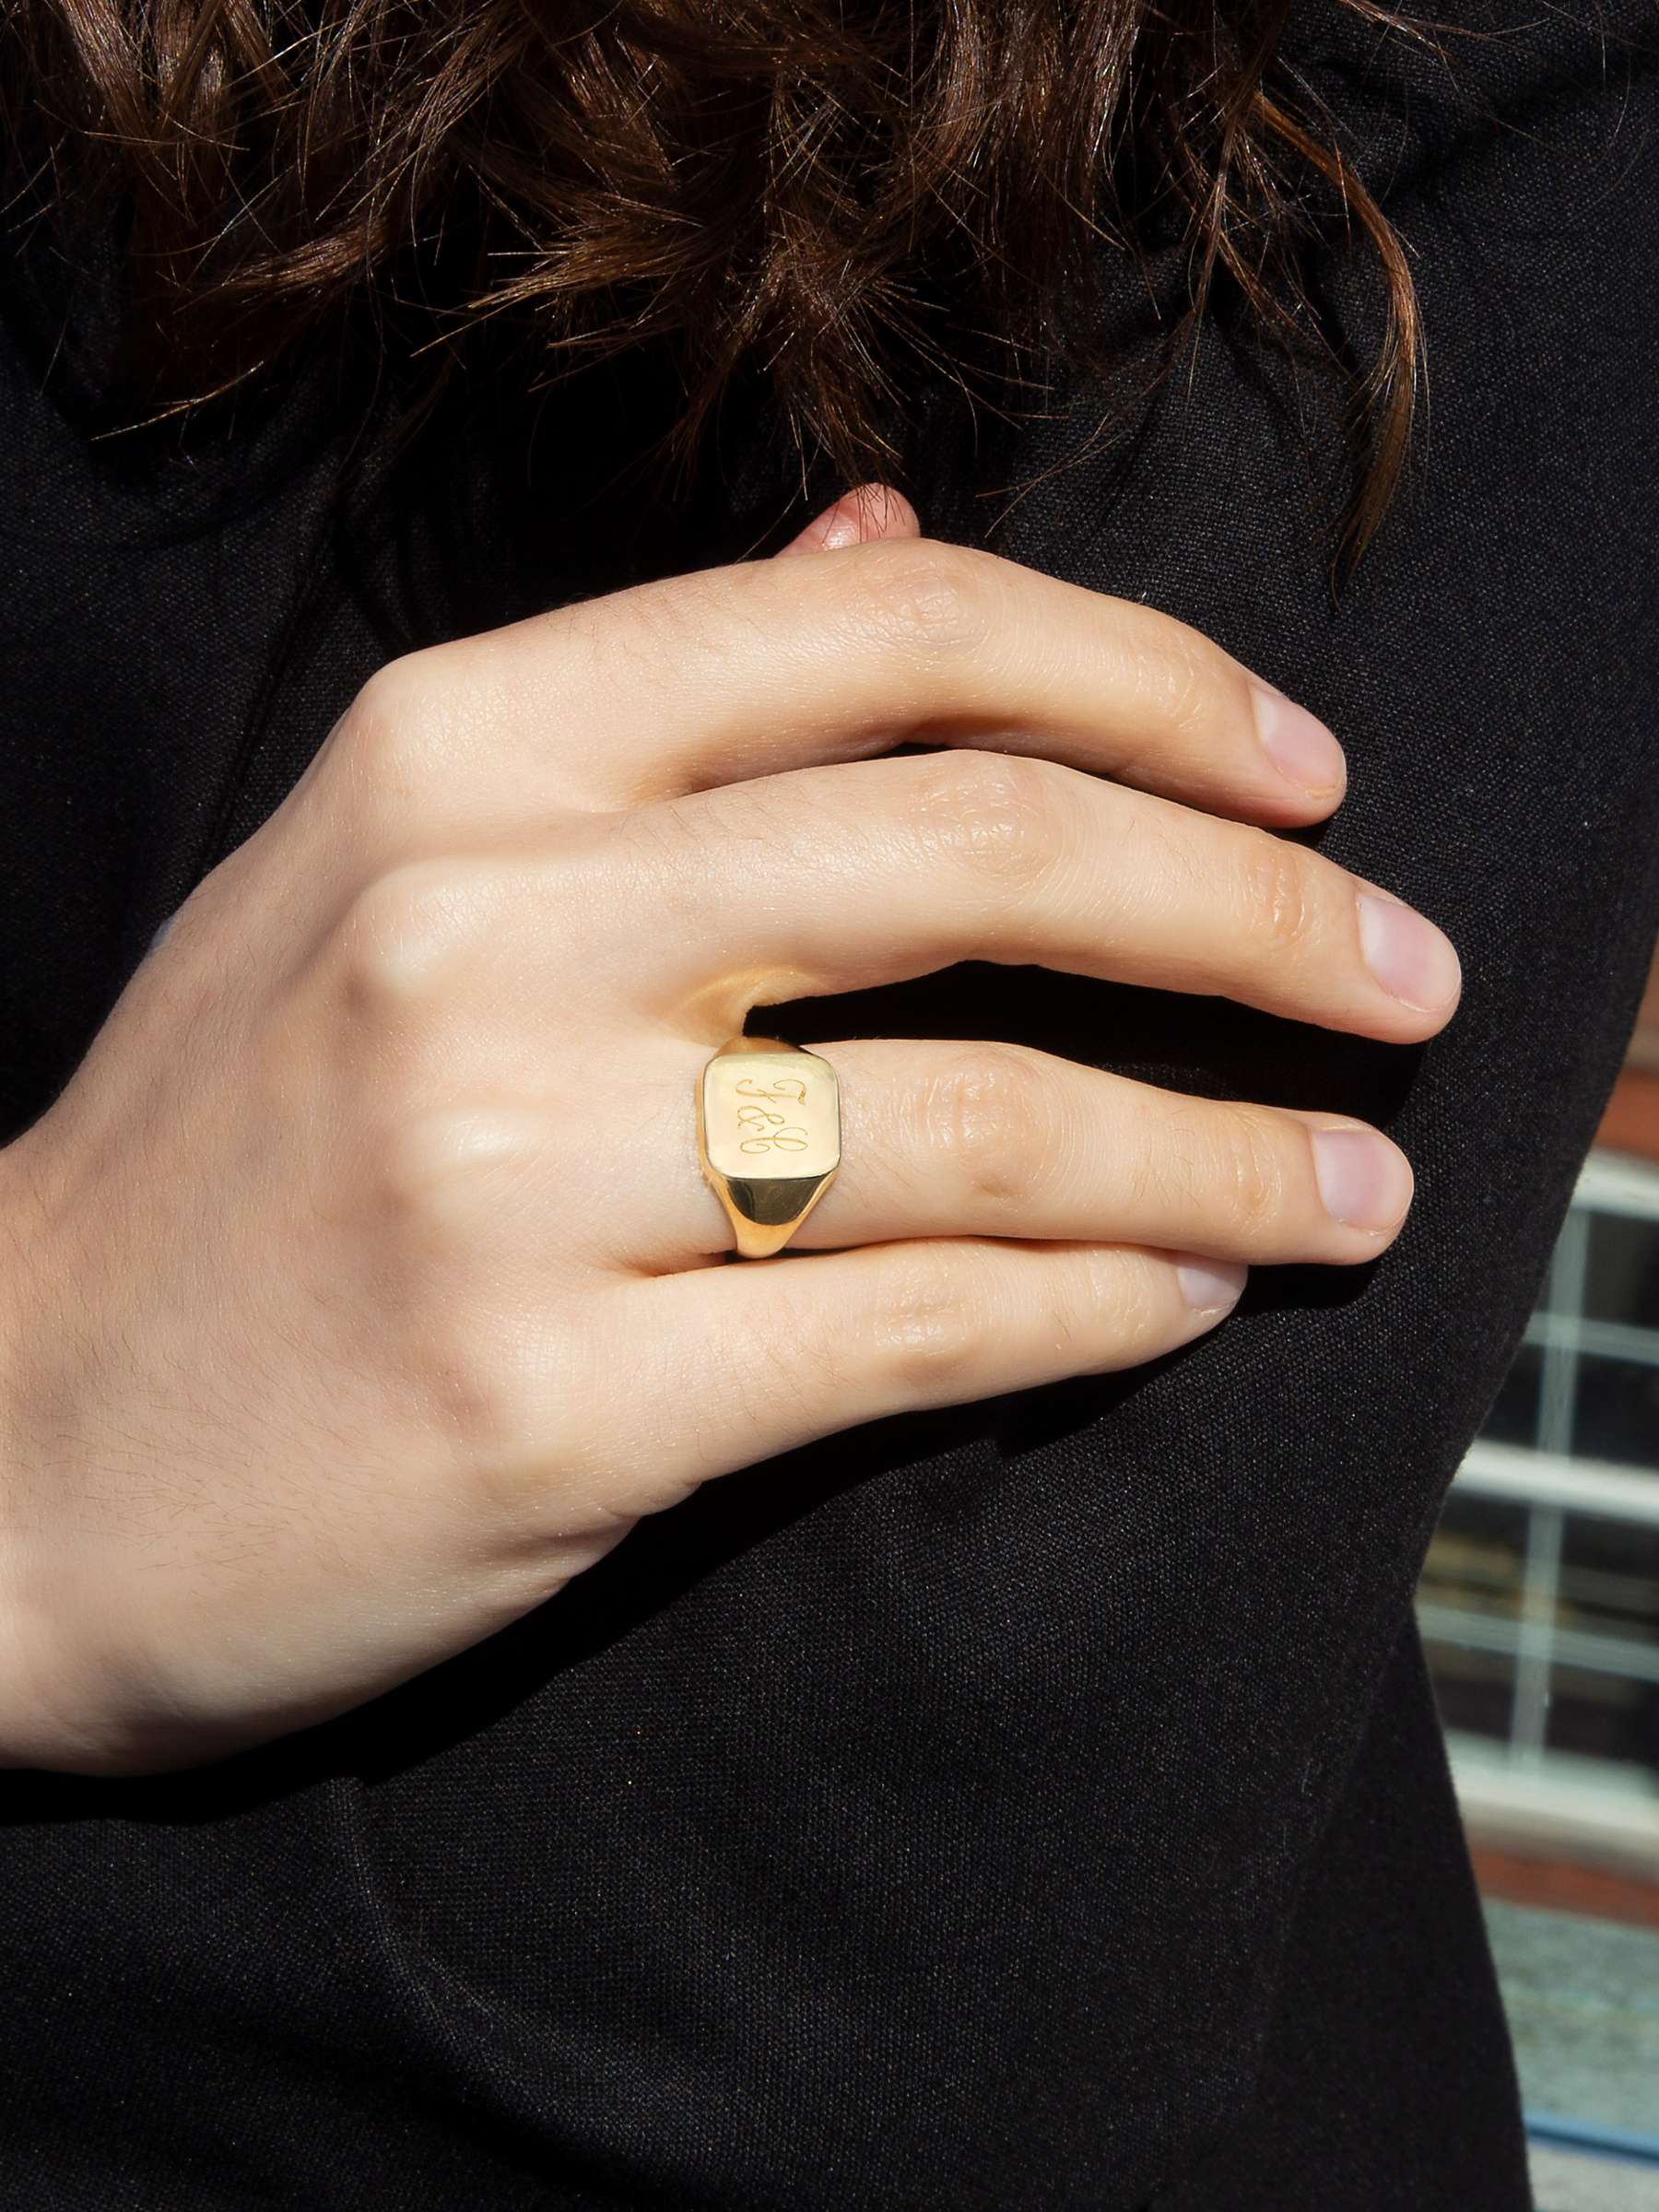 Buy IBB Personalised 9ct Gold Unisex Square Signet Ring, Gold Online at johnlewis.com